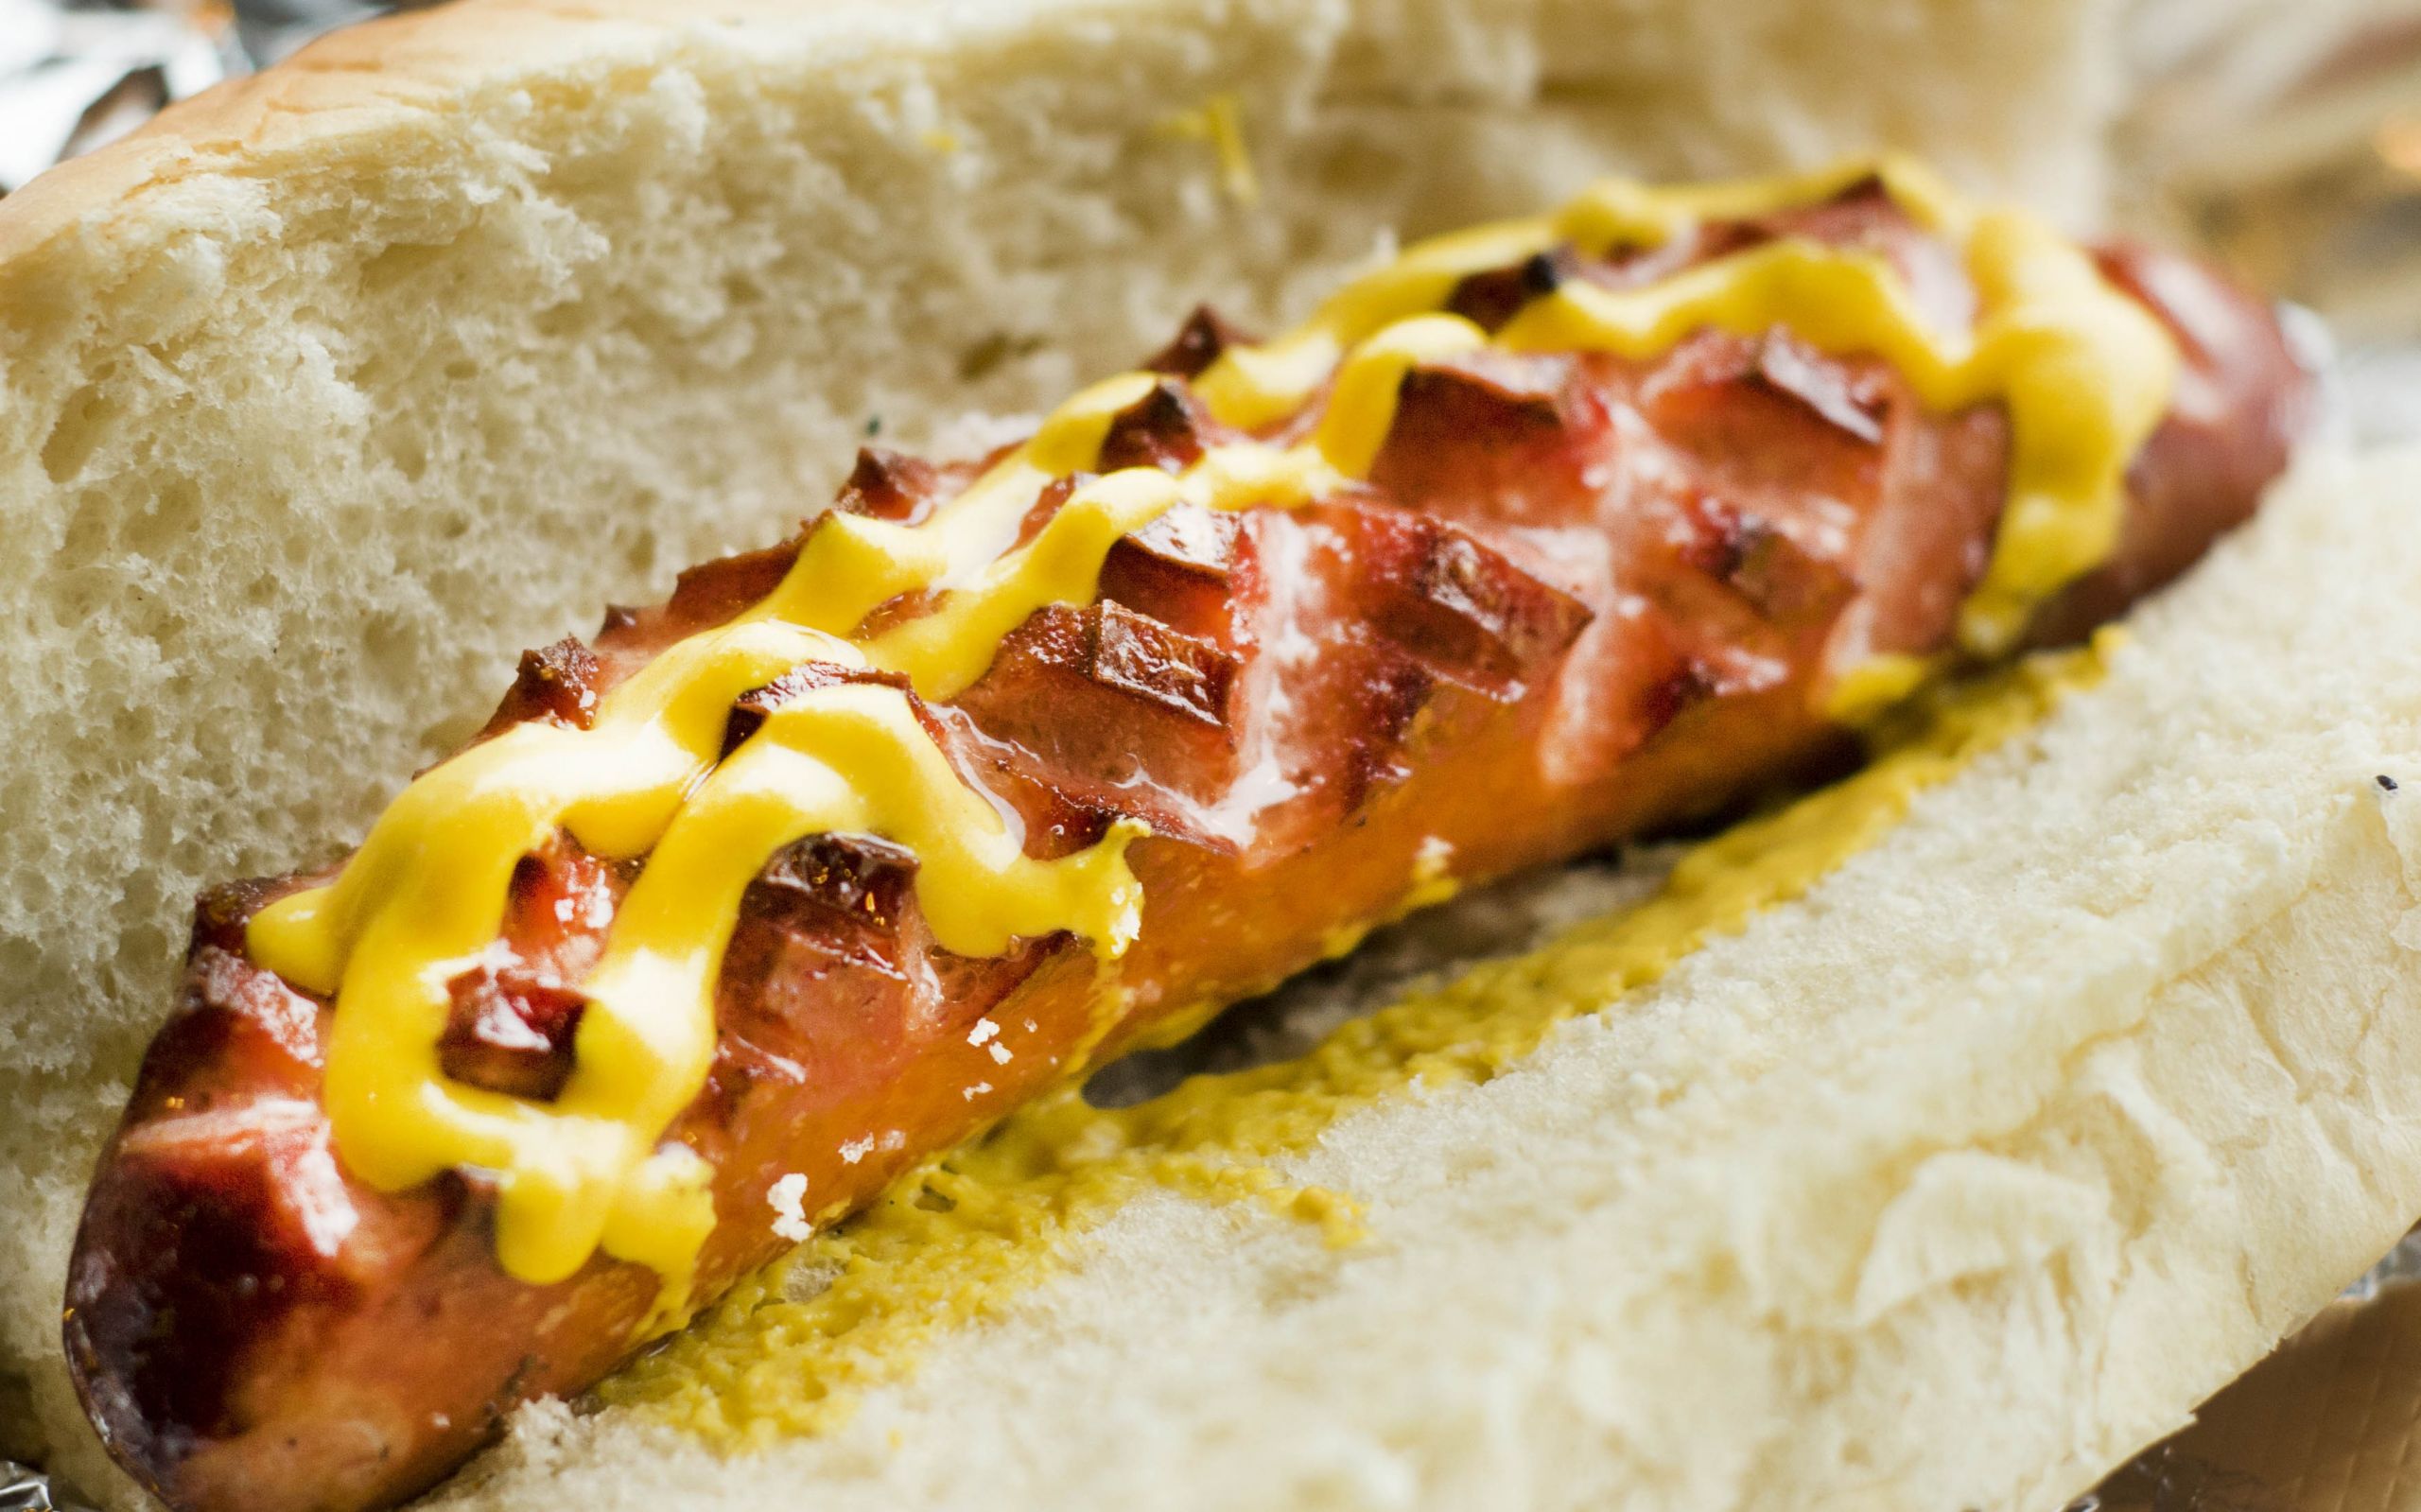 Gourmet Hot Dogs
 Chargrilled gourmet hot dog purveyor Doggy Style opens